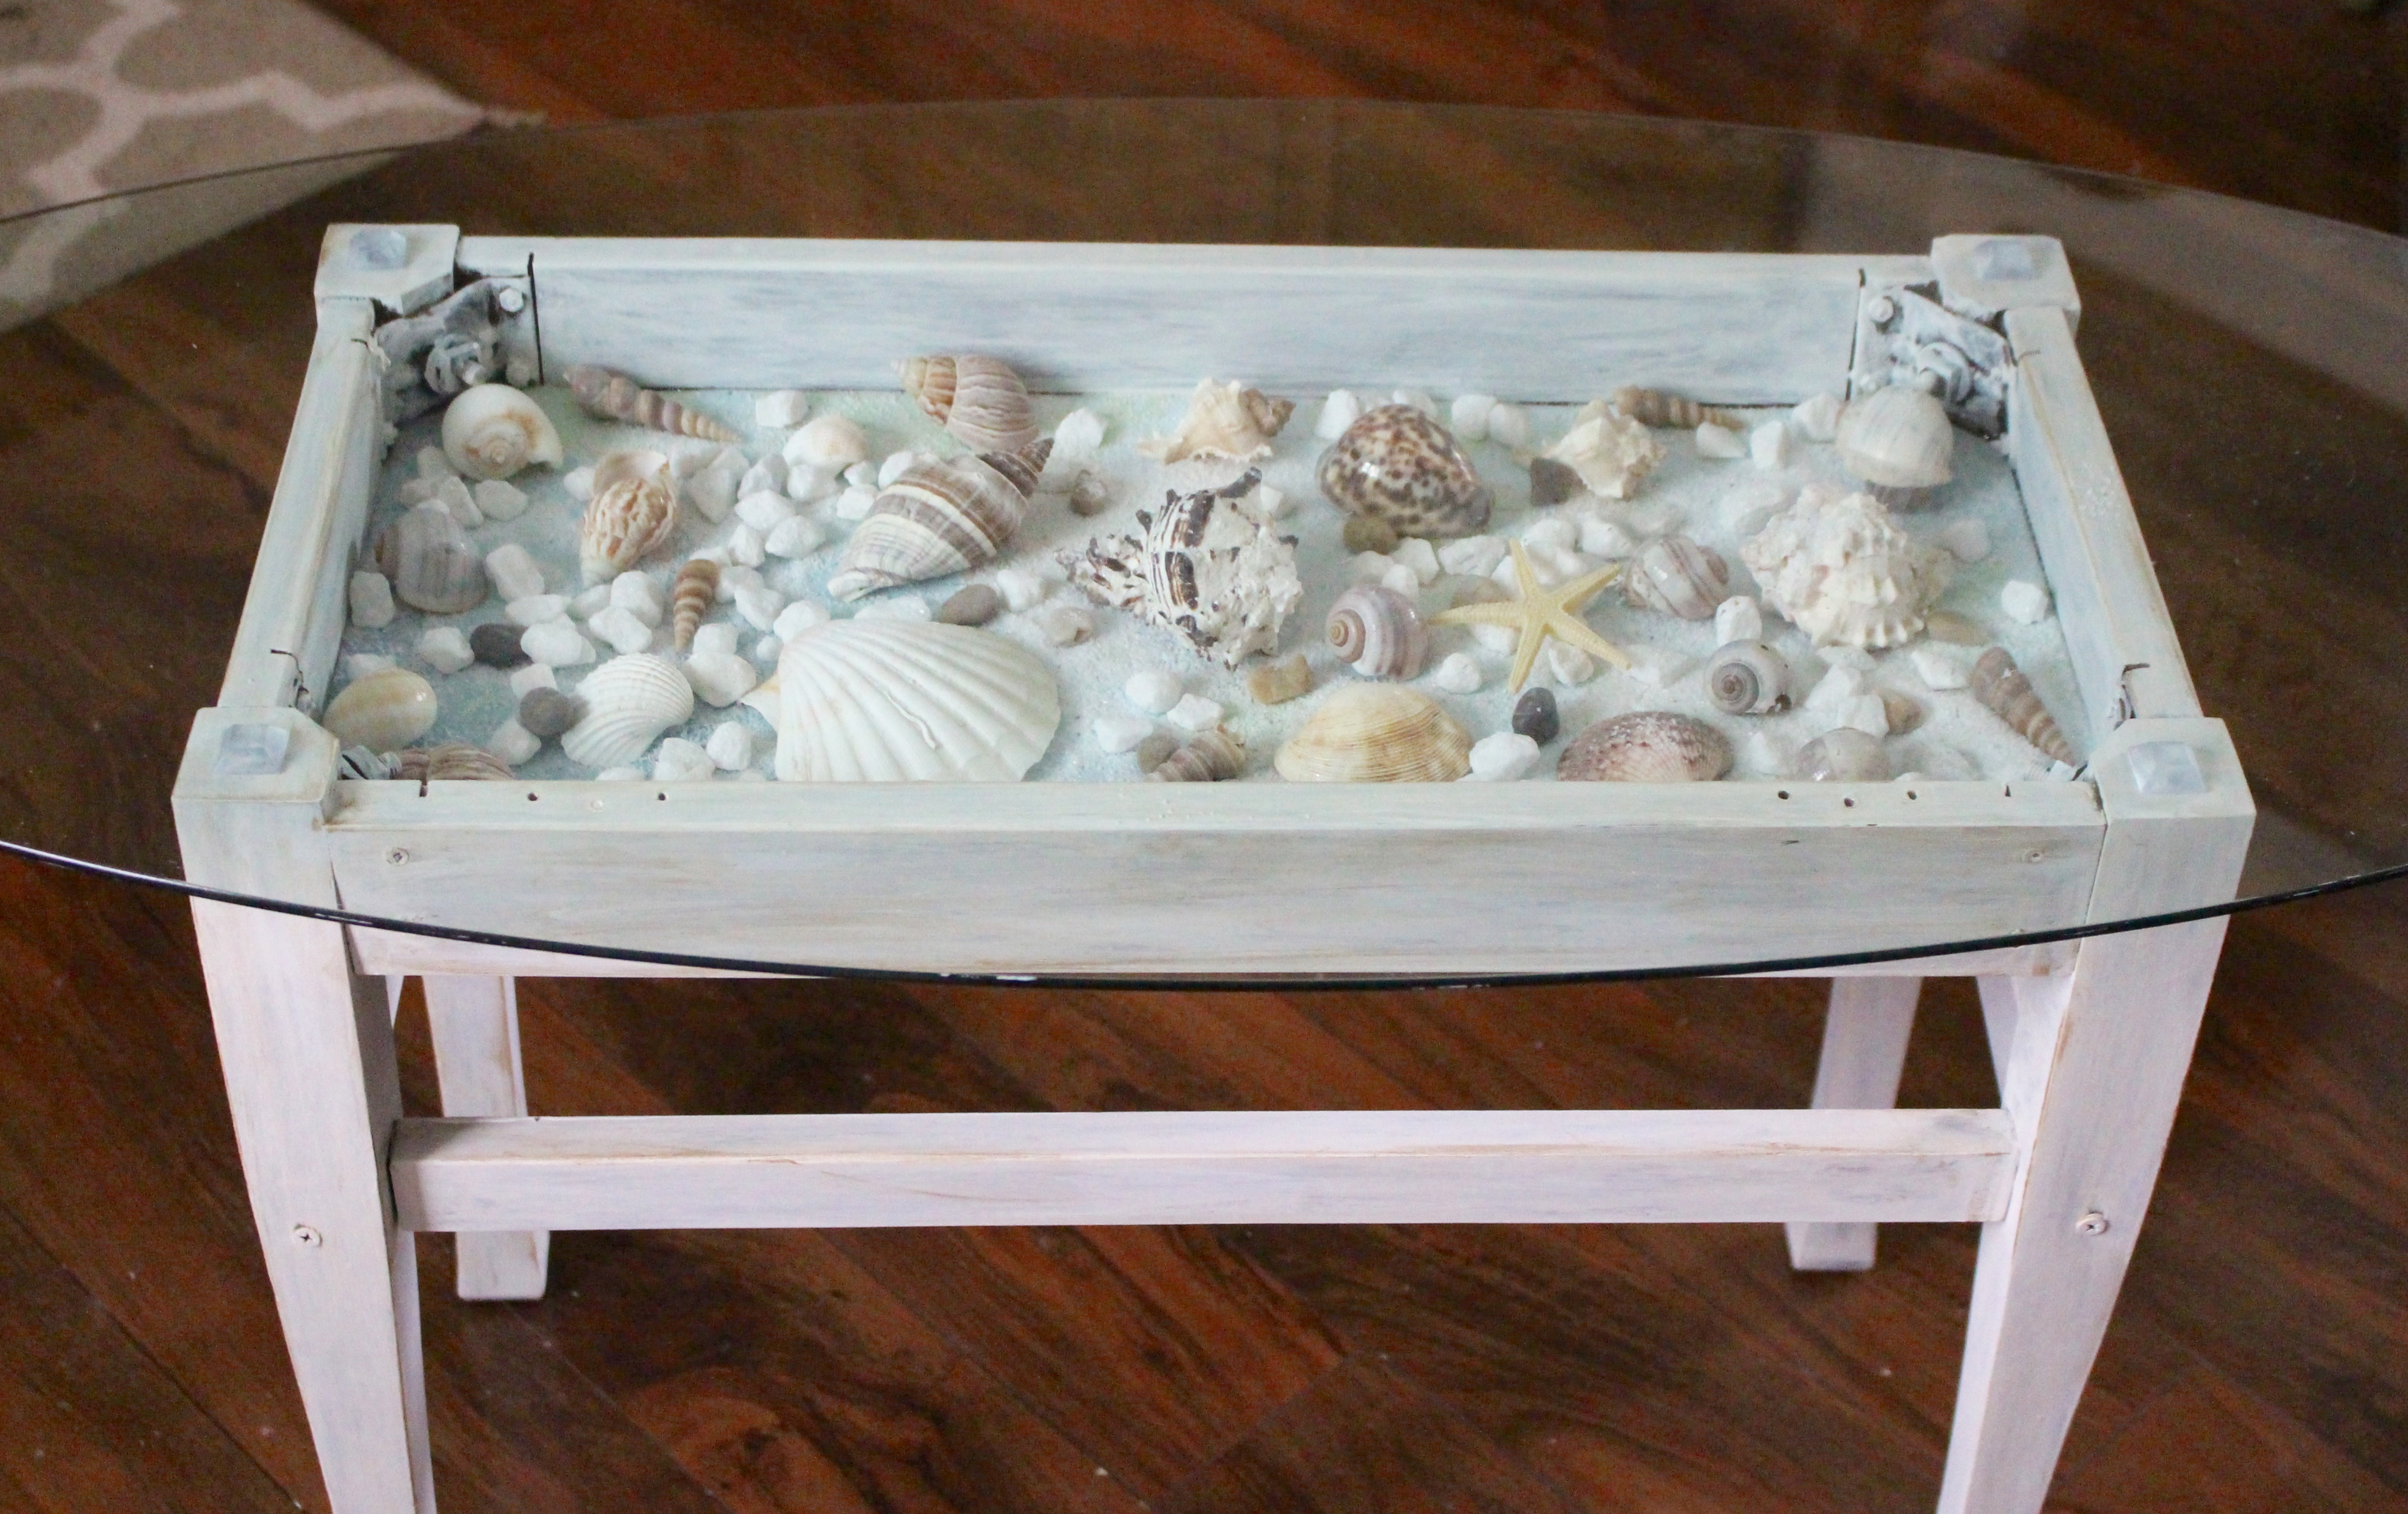 Beautiful DIY Shell Decor To Make This Summer - Page 2 of 2